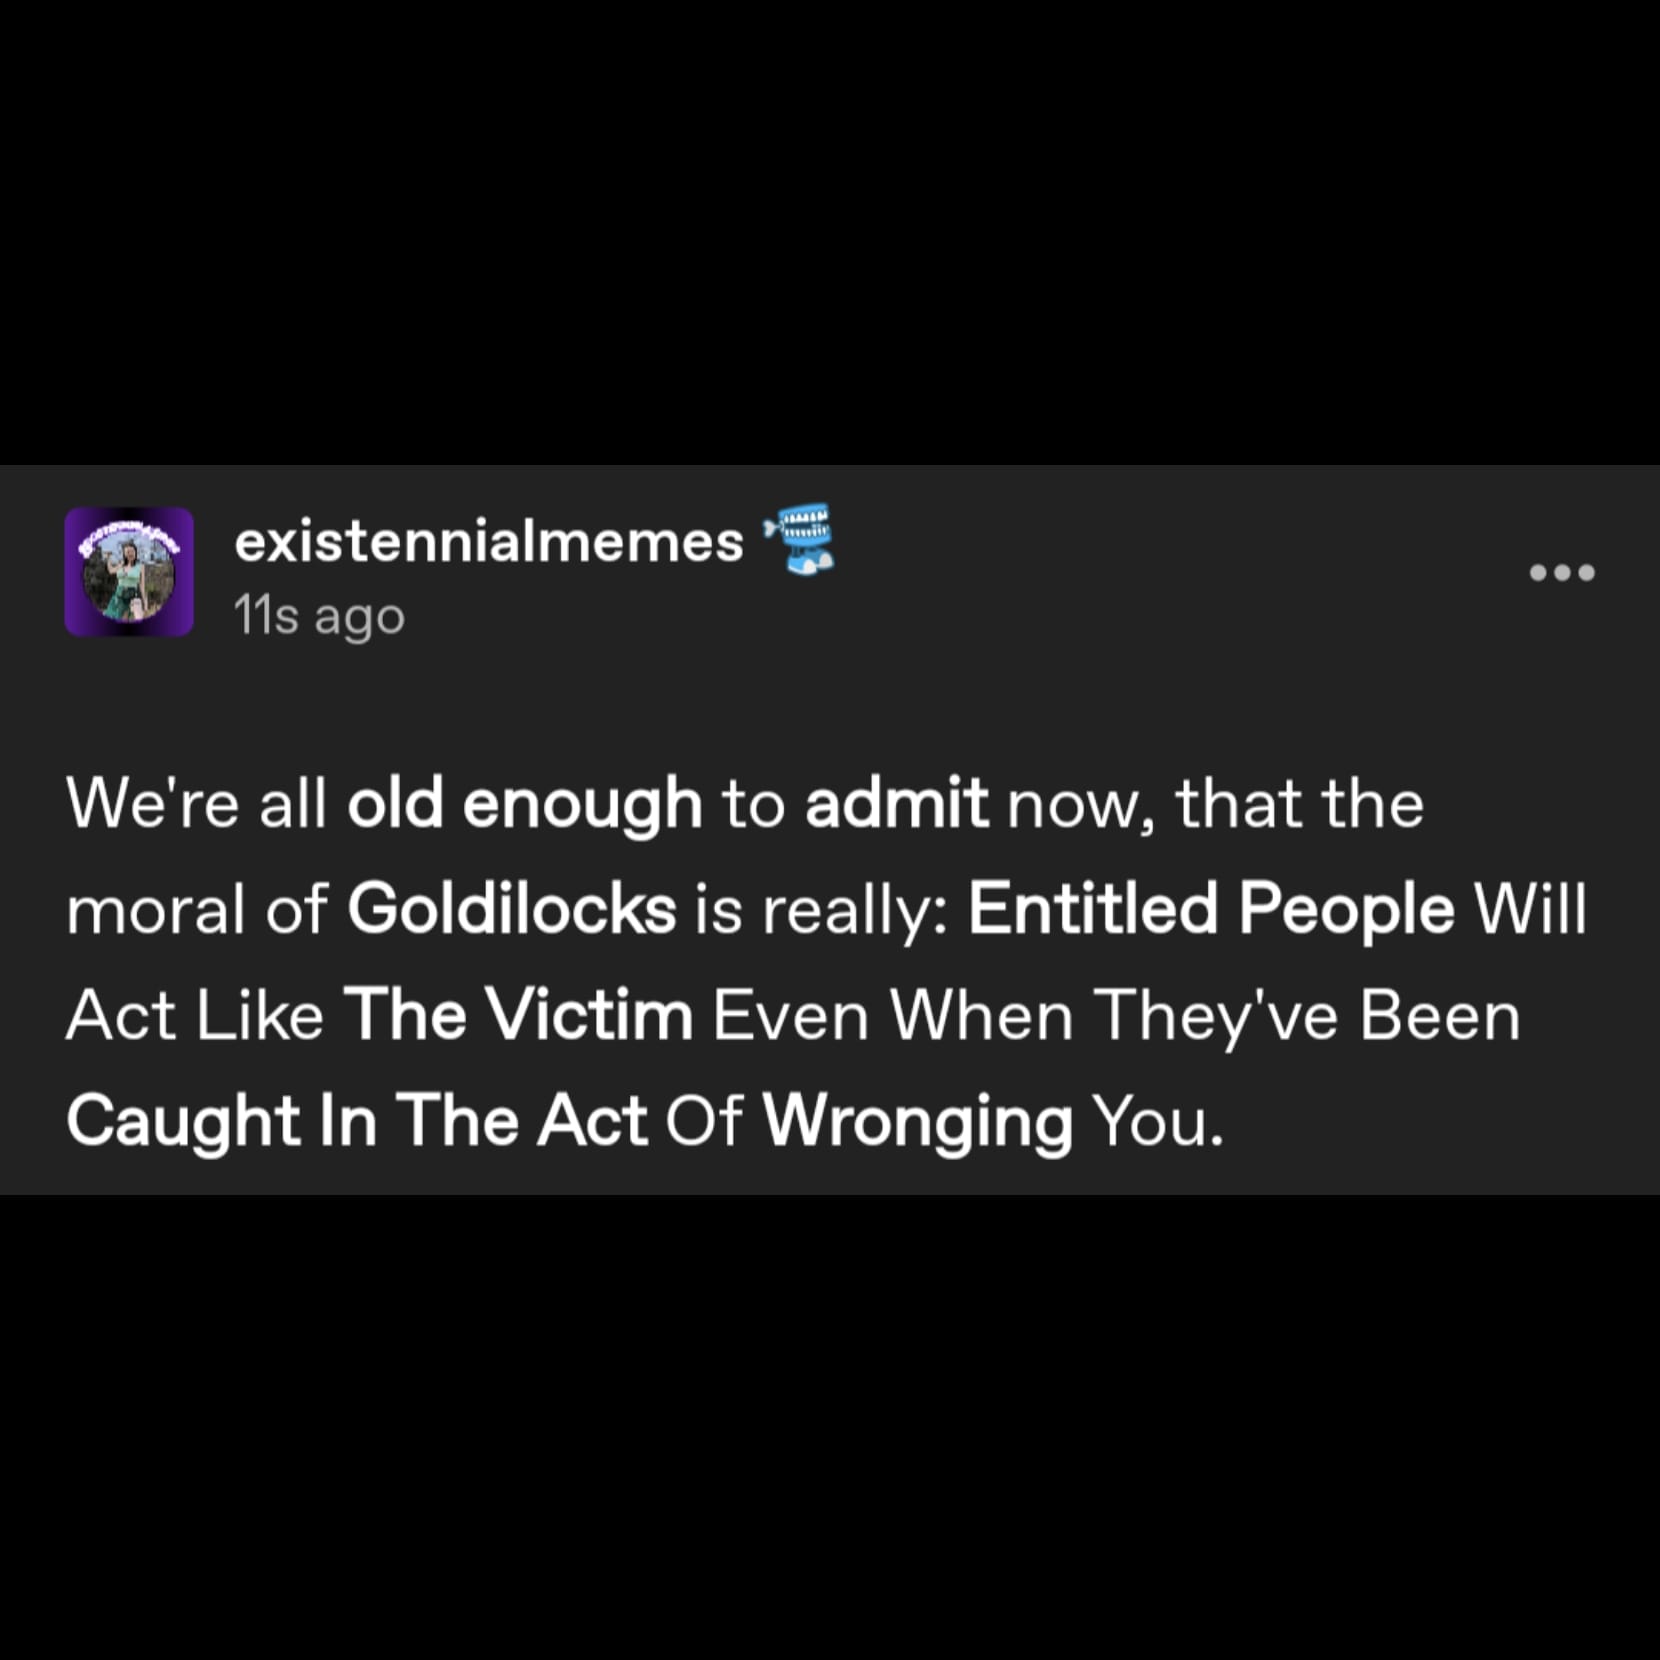 a tumblr post by user existennialmemes that reads: We're all old enough to admit now, that the moral of Goldilocks is really: Entitled People Will Act Like The Victim Even When They've Been Caught In The Act Of Wronging You.